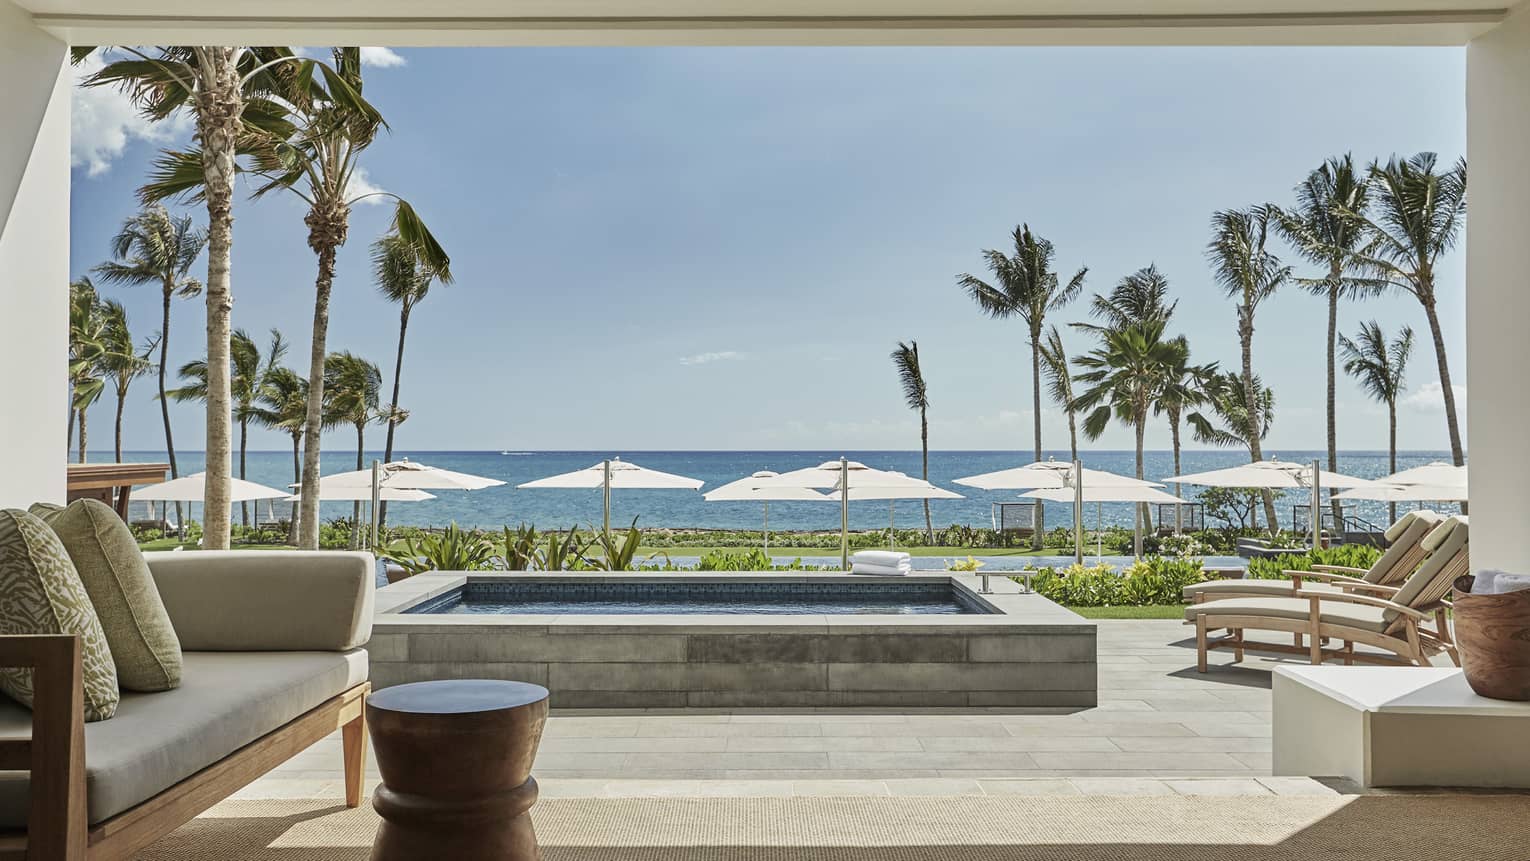 Pacific Suite open to wall to patio with stone plunge pool, lounge chairs, ocean views